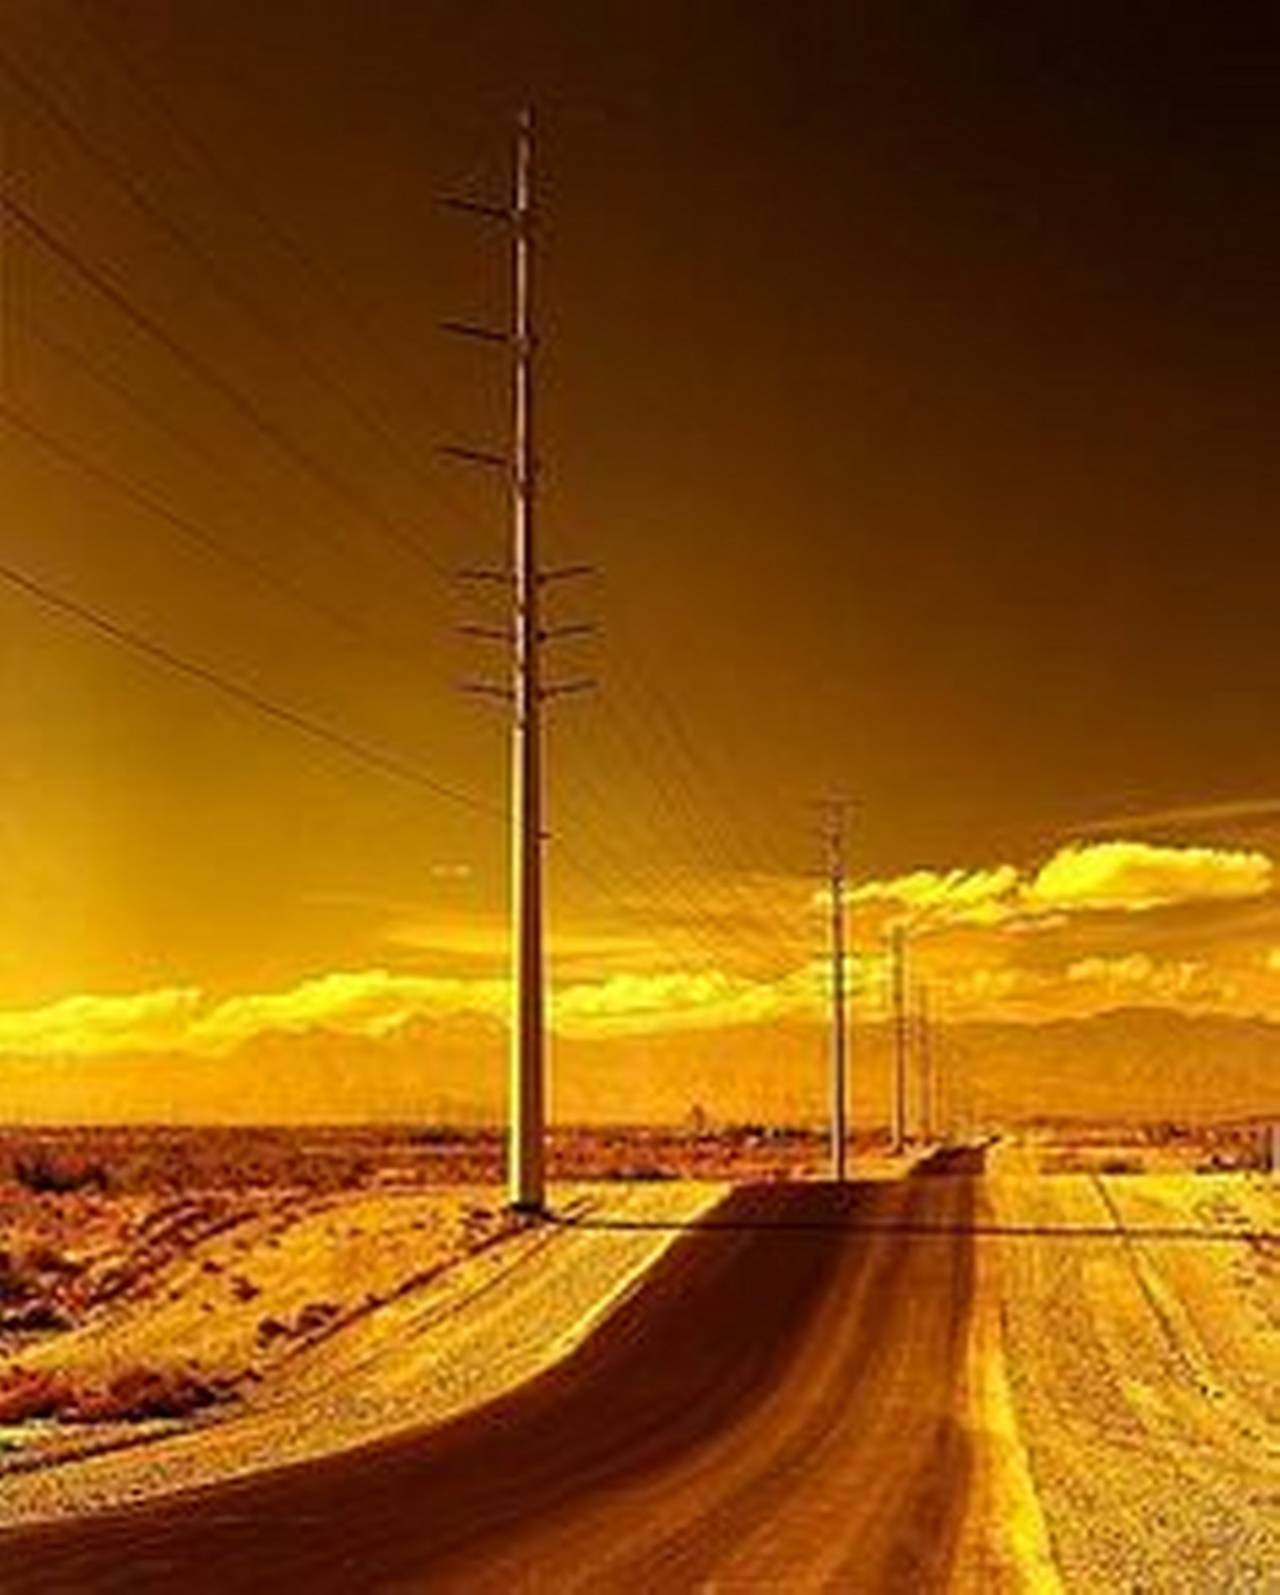 Albert Watson Color Photograph - Electrical Pylons, Road yet to be named, outside Las Vegas